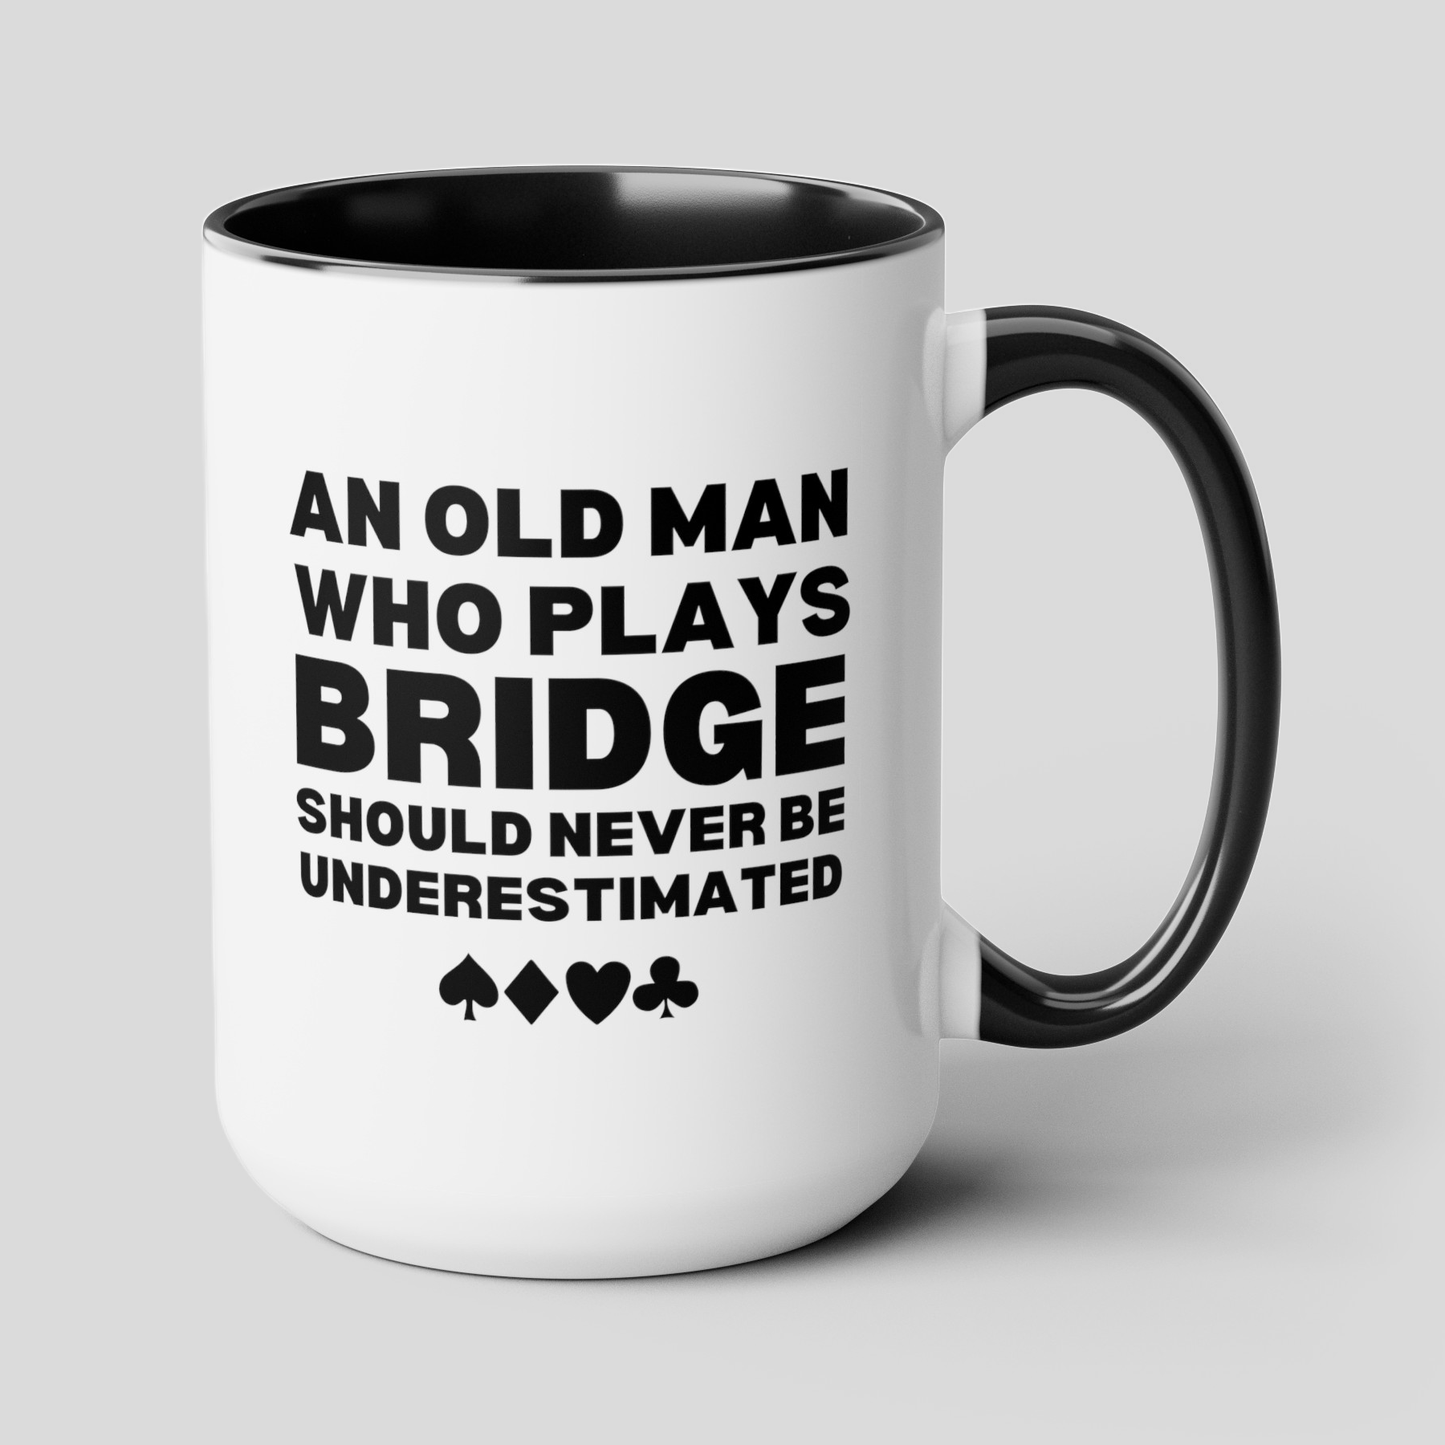 An Old Man Who Plays Bridge Should Never Be Underestimated 15oz white with black accent funny large coffee mug gift for player card game waveywares wavey wares wavywares wavy wares cover